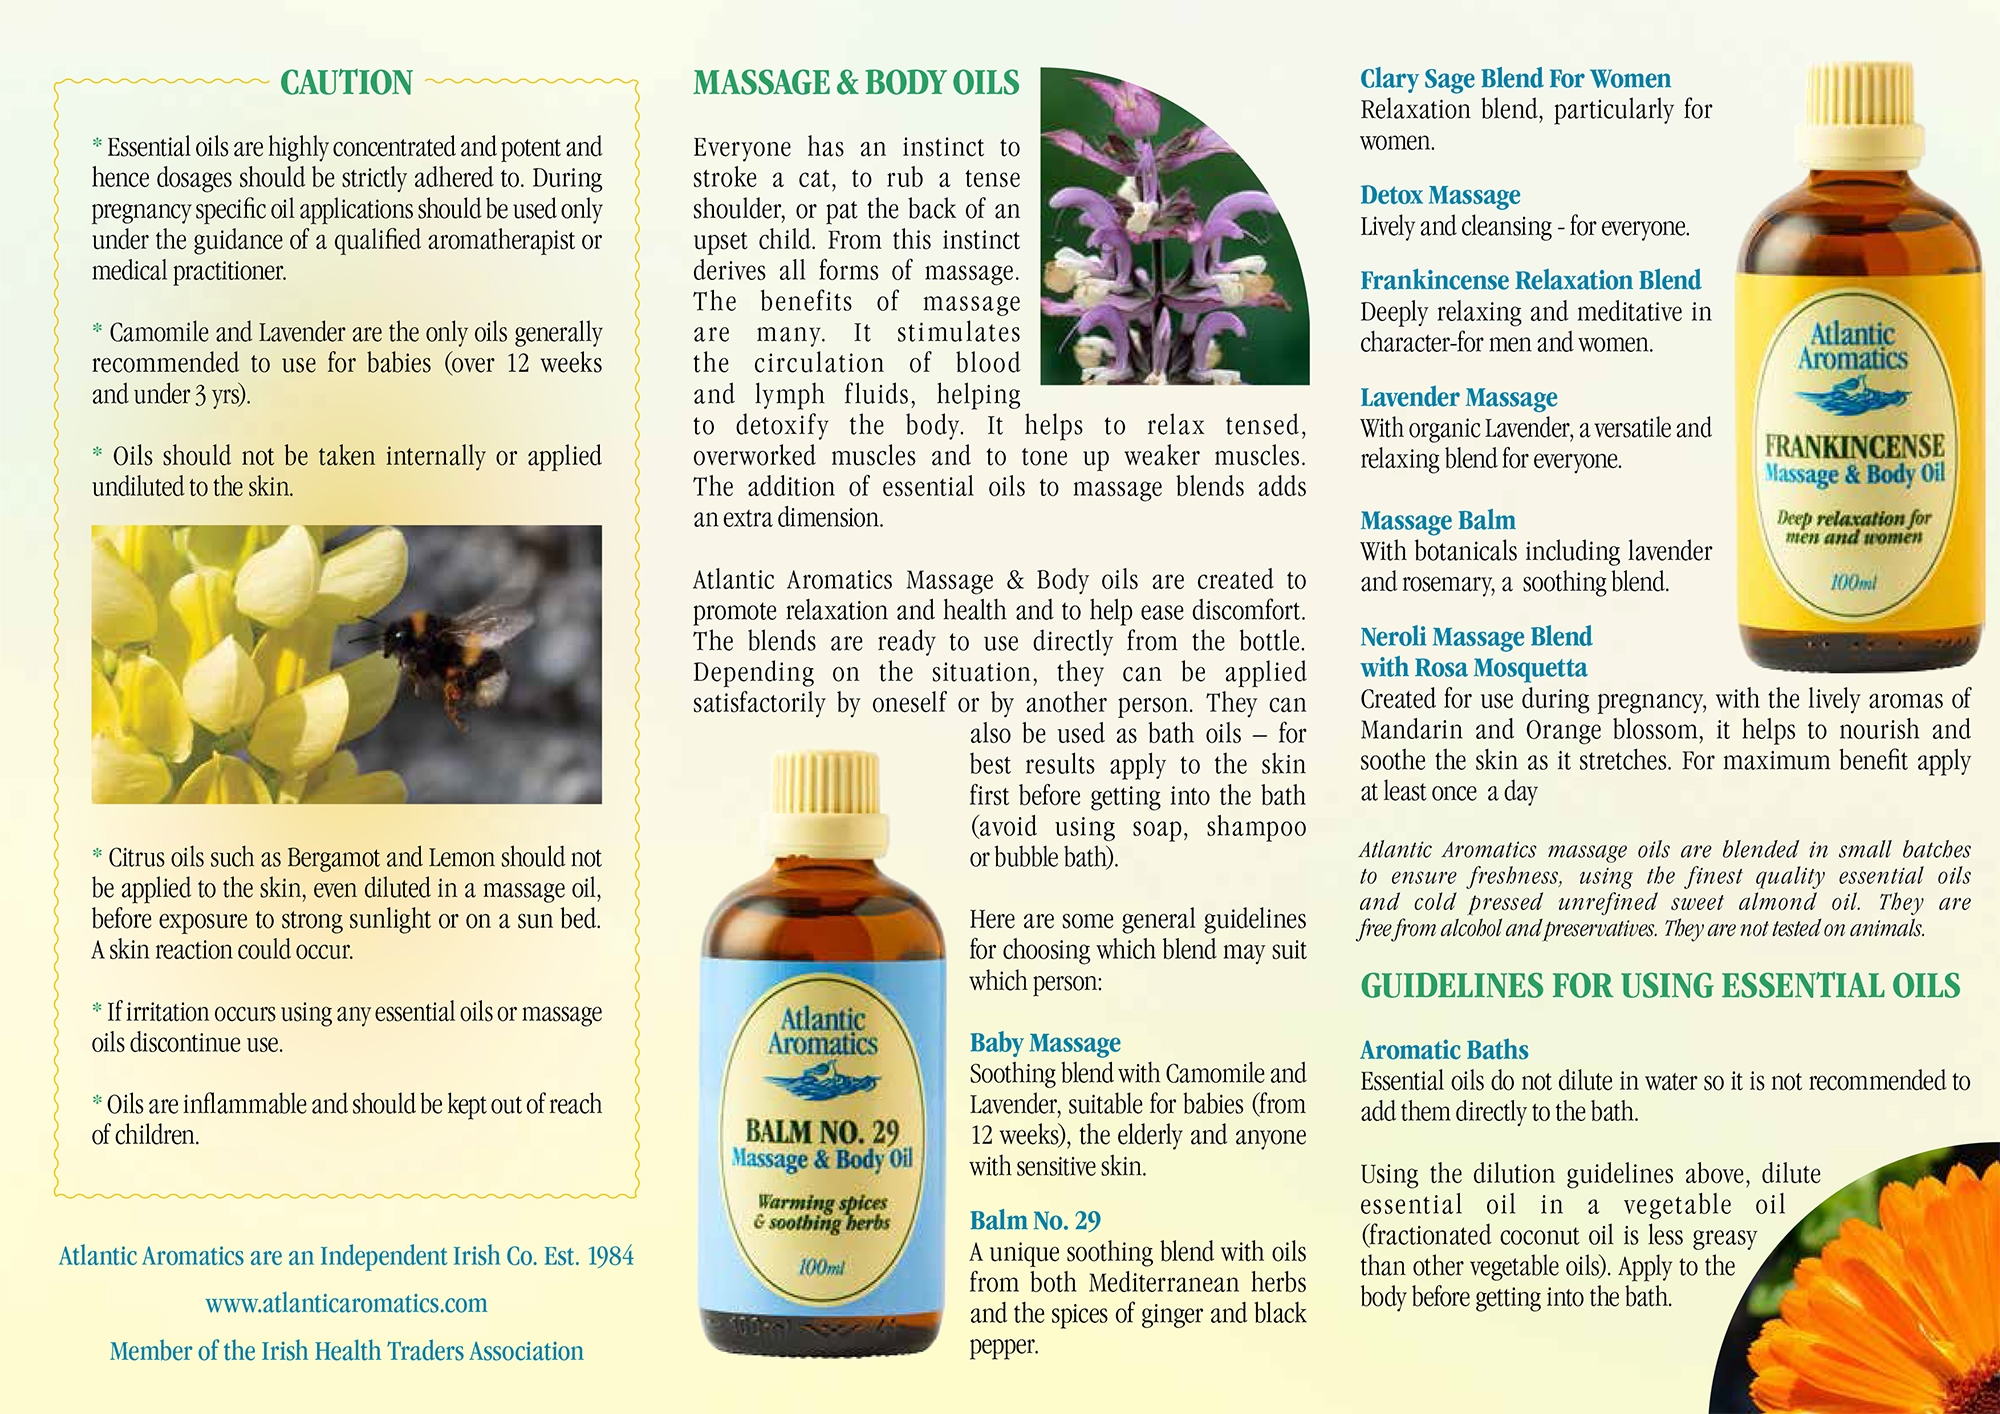 Product Use Guide by Atlantic Aromatics